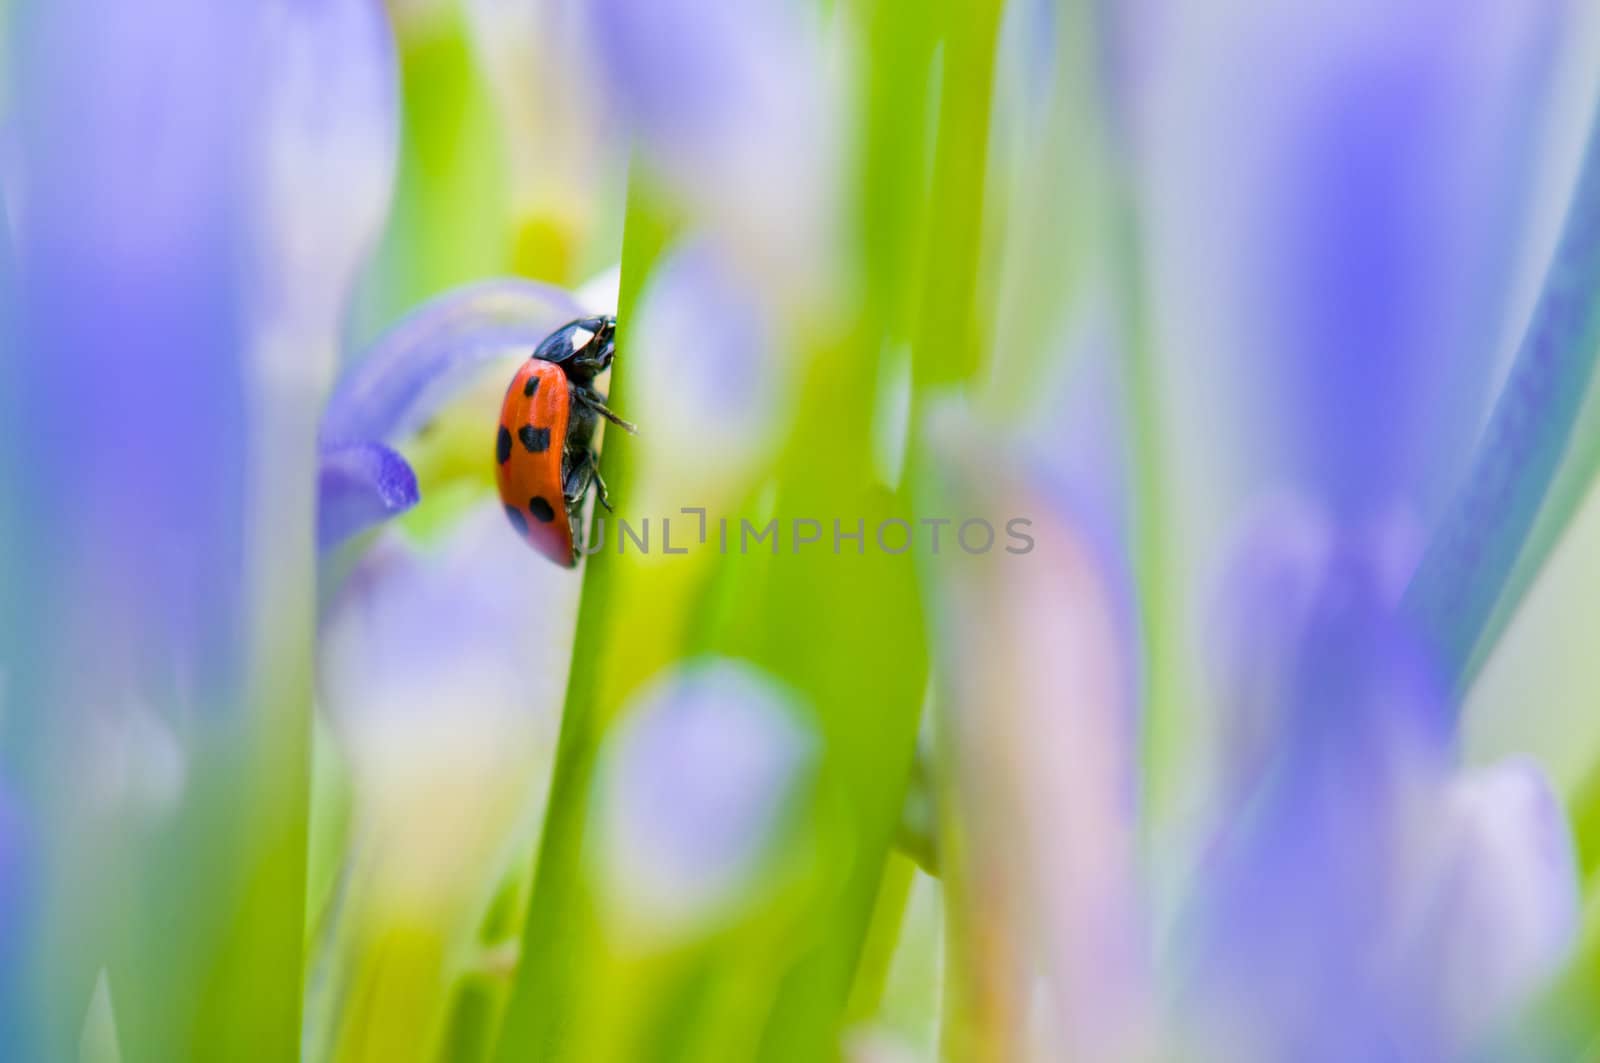 Close up shoot of a ladybug in a summer flower